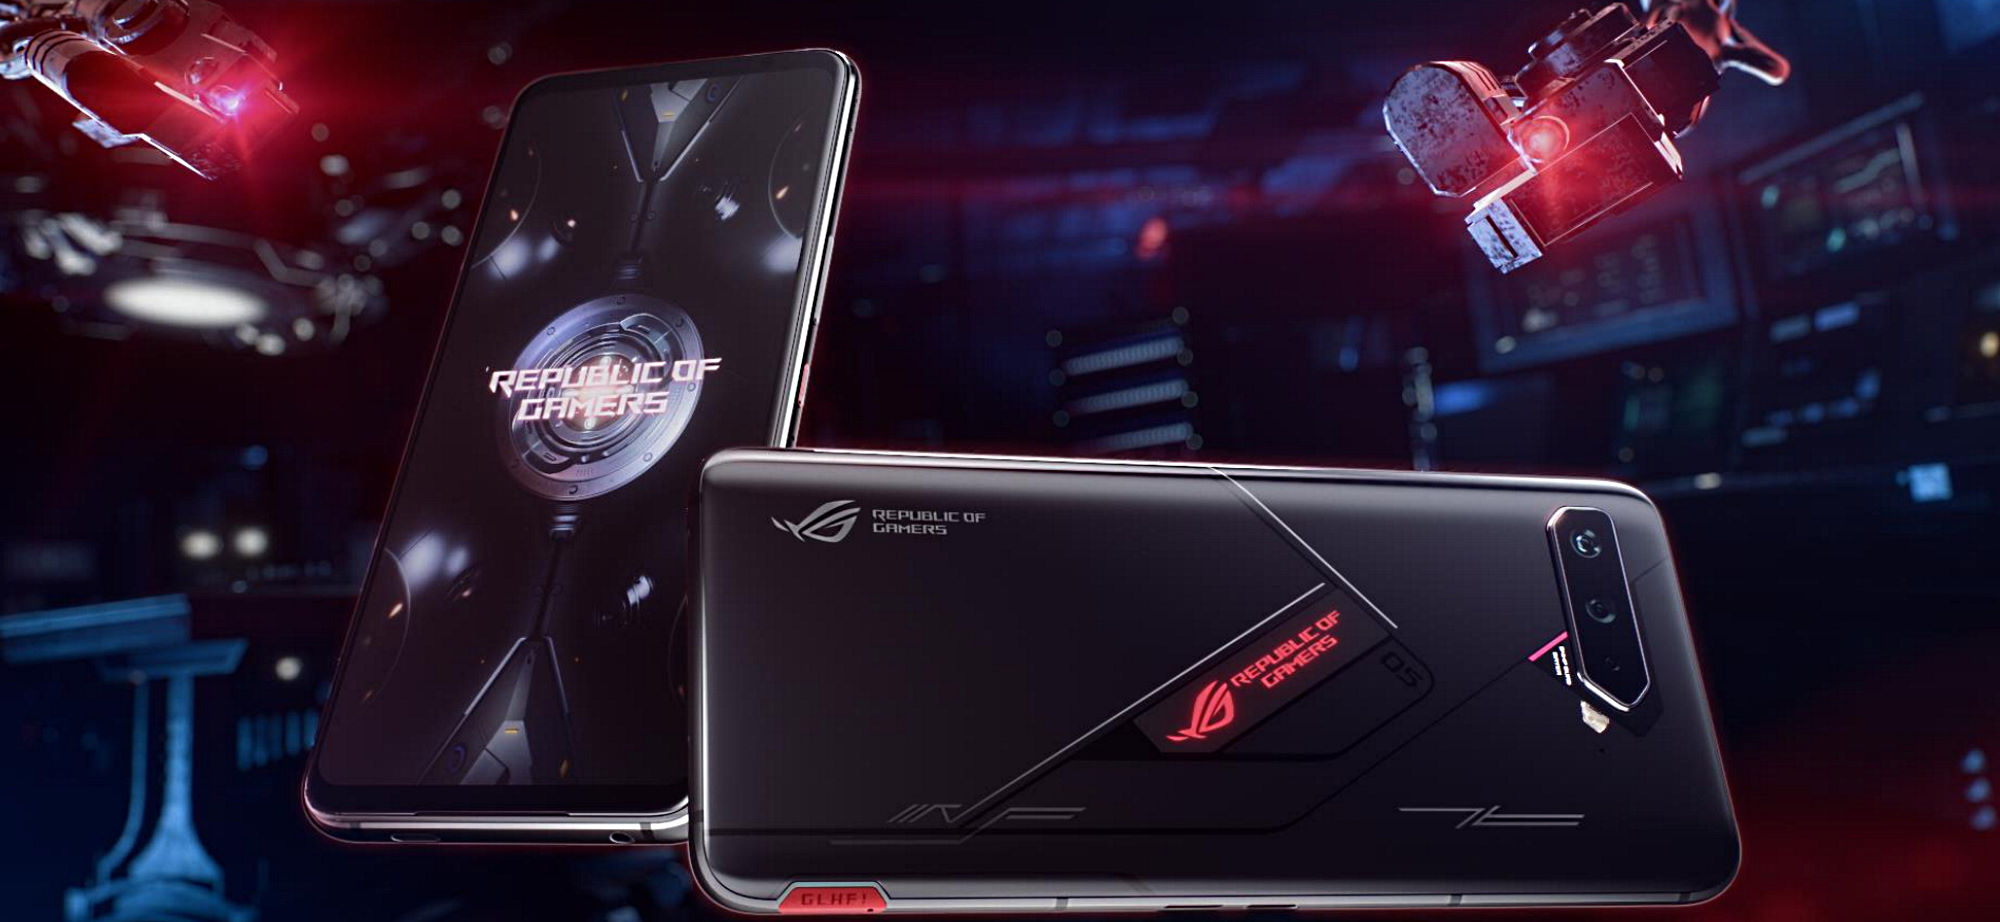 Rendering of the front and back of the ROG Phone 5, in a sci-fi themed room with red lighting.